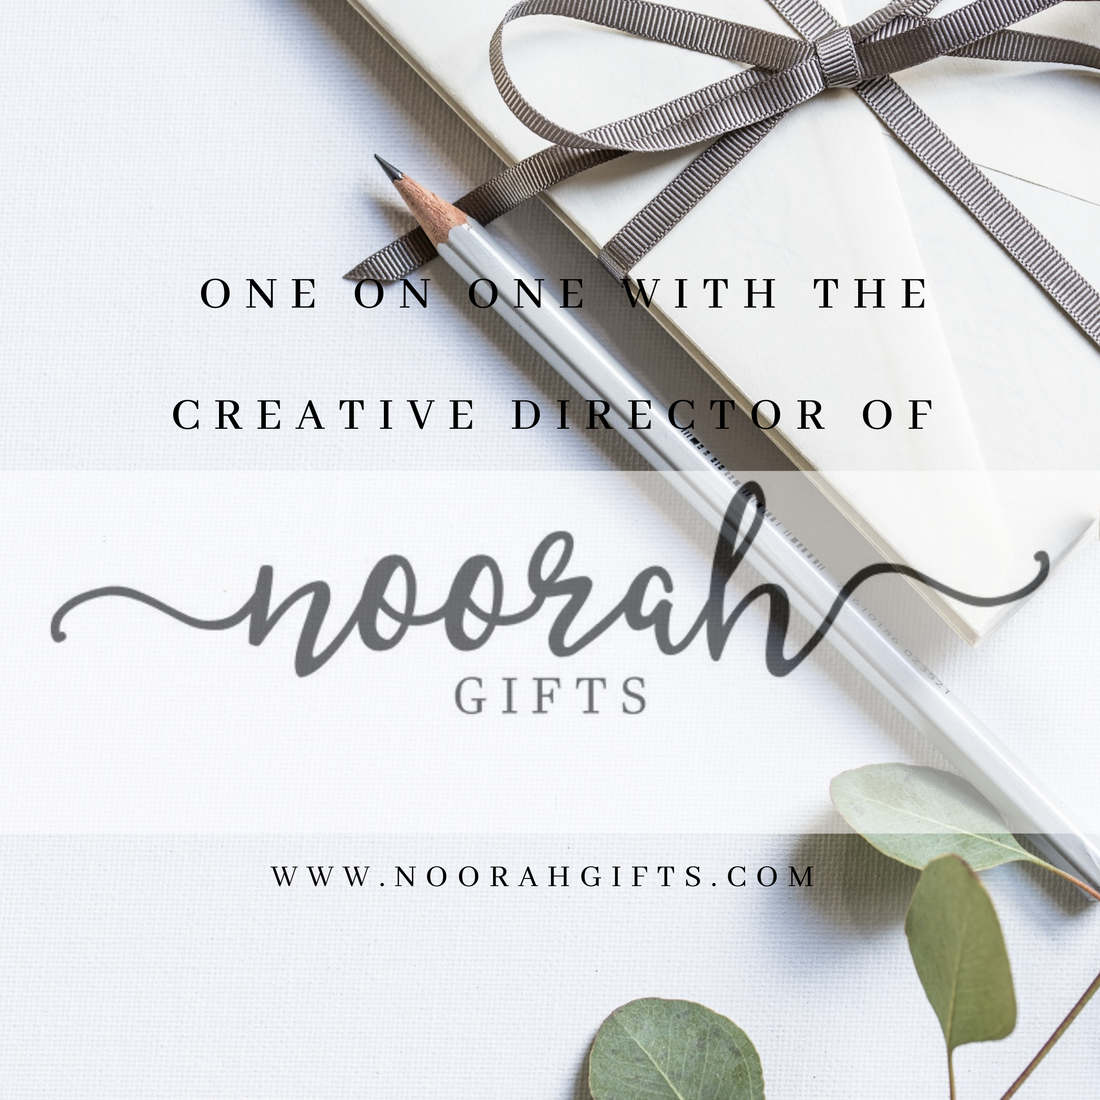 One on one with the Creative Director of Noorah Gifts